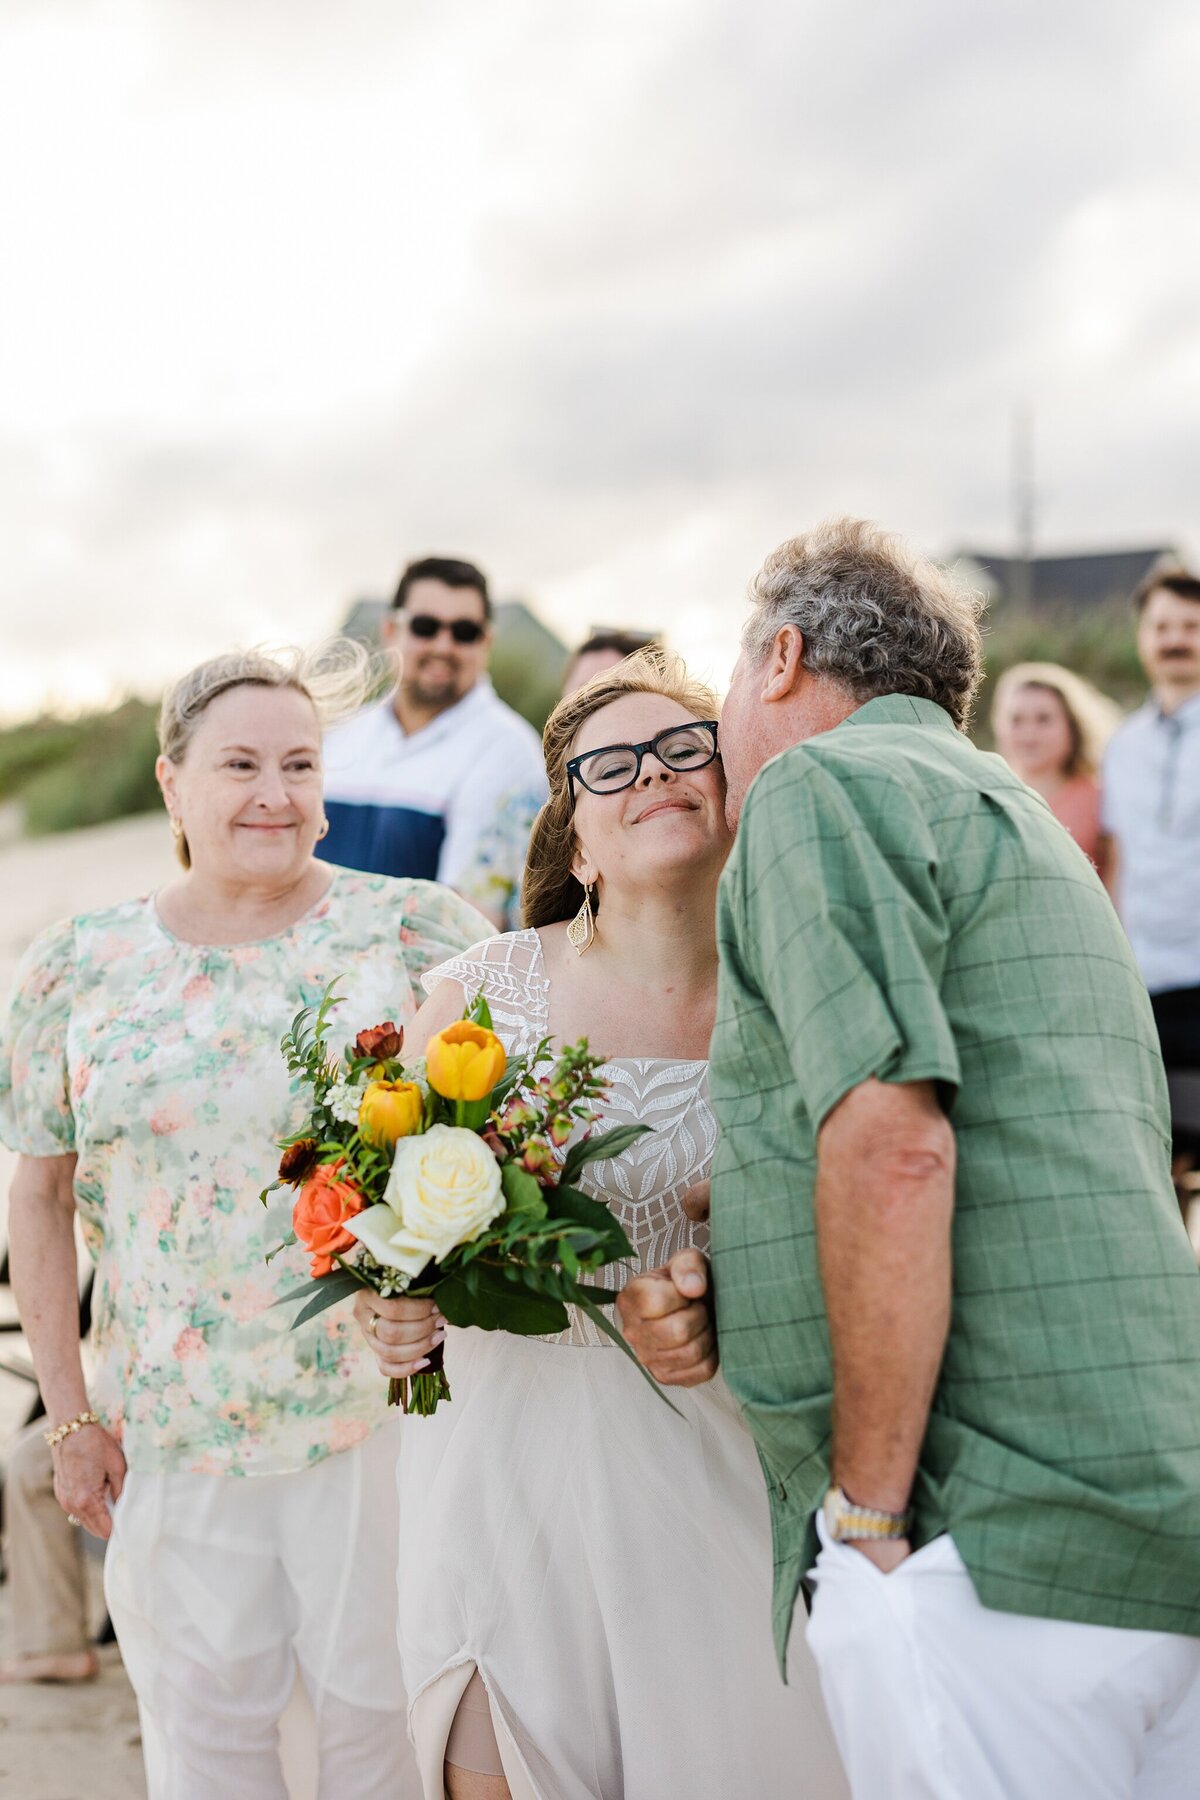 Candid shot of a bride receiving a kiss on the cheek from her father as her parents finish walking down the aisle during her wedding ceremony at Crystal Beach, Texas. The bride is wearing a detailed white dress and is holding a bouquet. Guests can be seen in the background standing on the sand.